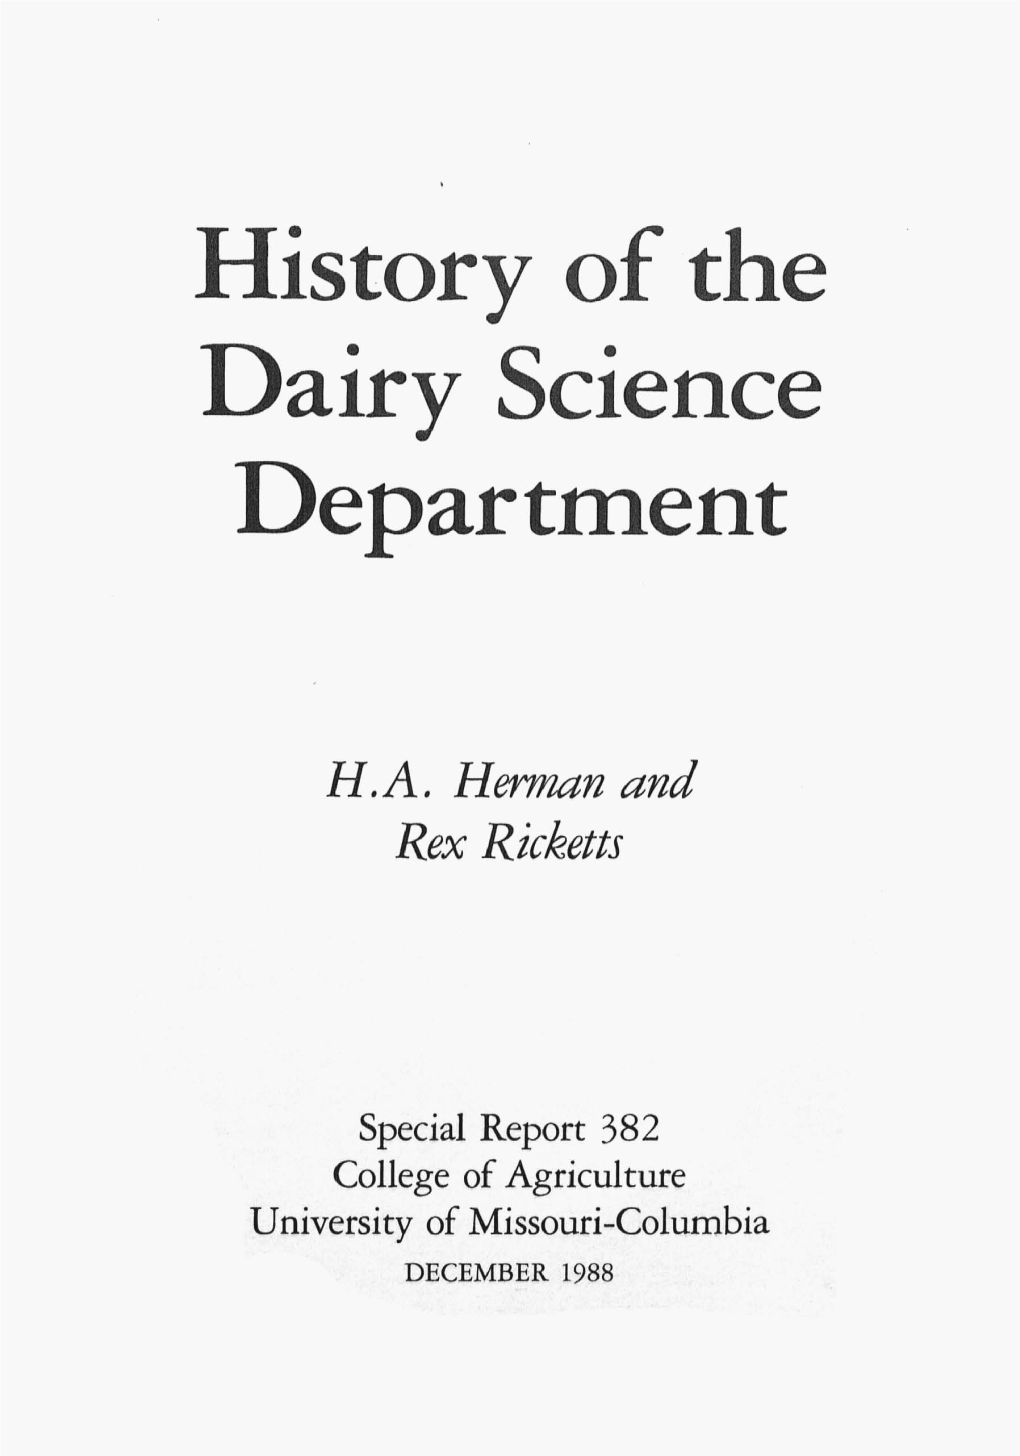 History of the Dairy Science Department